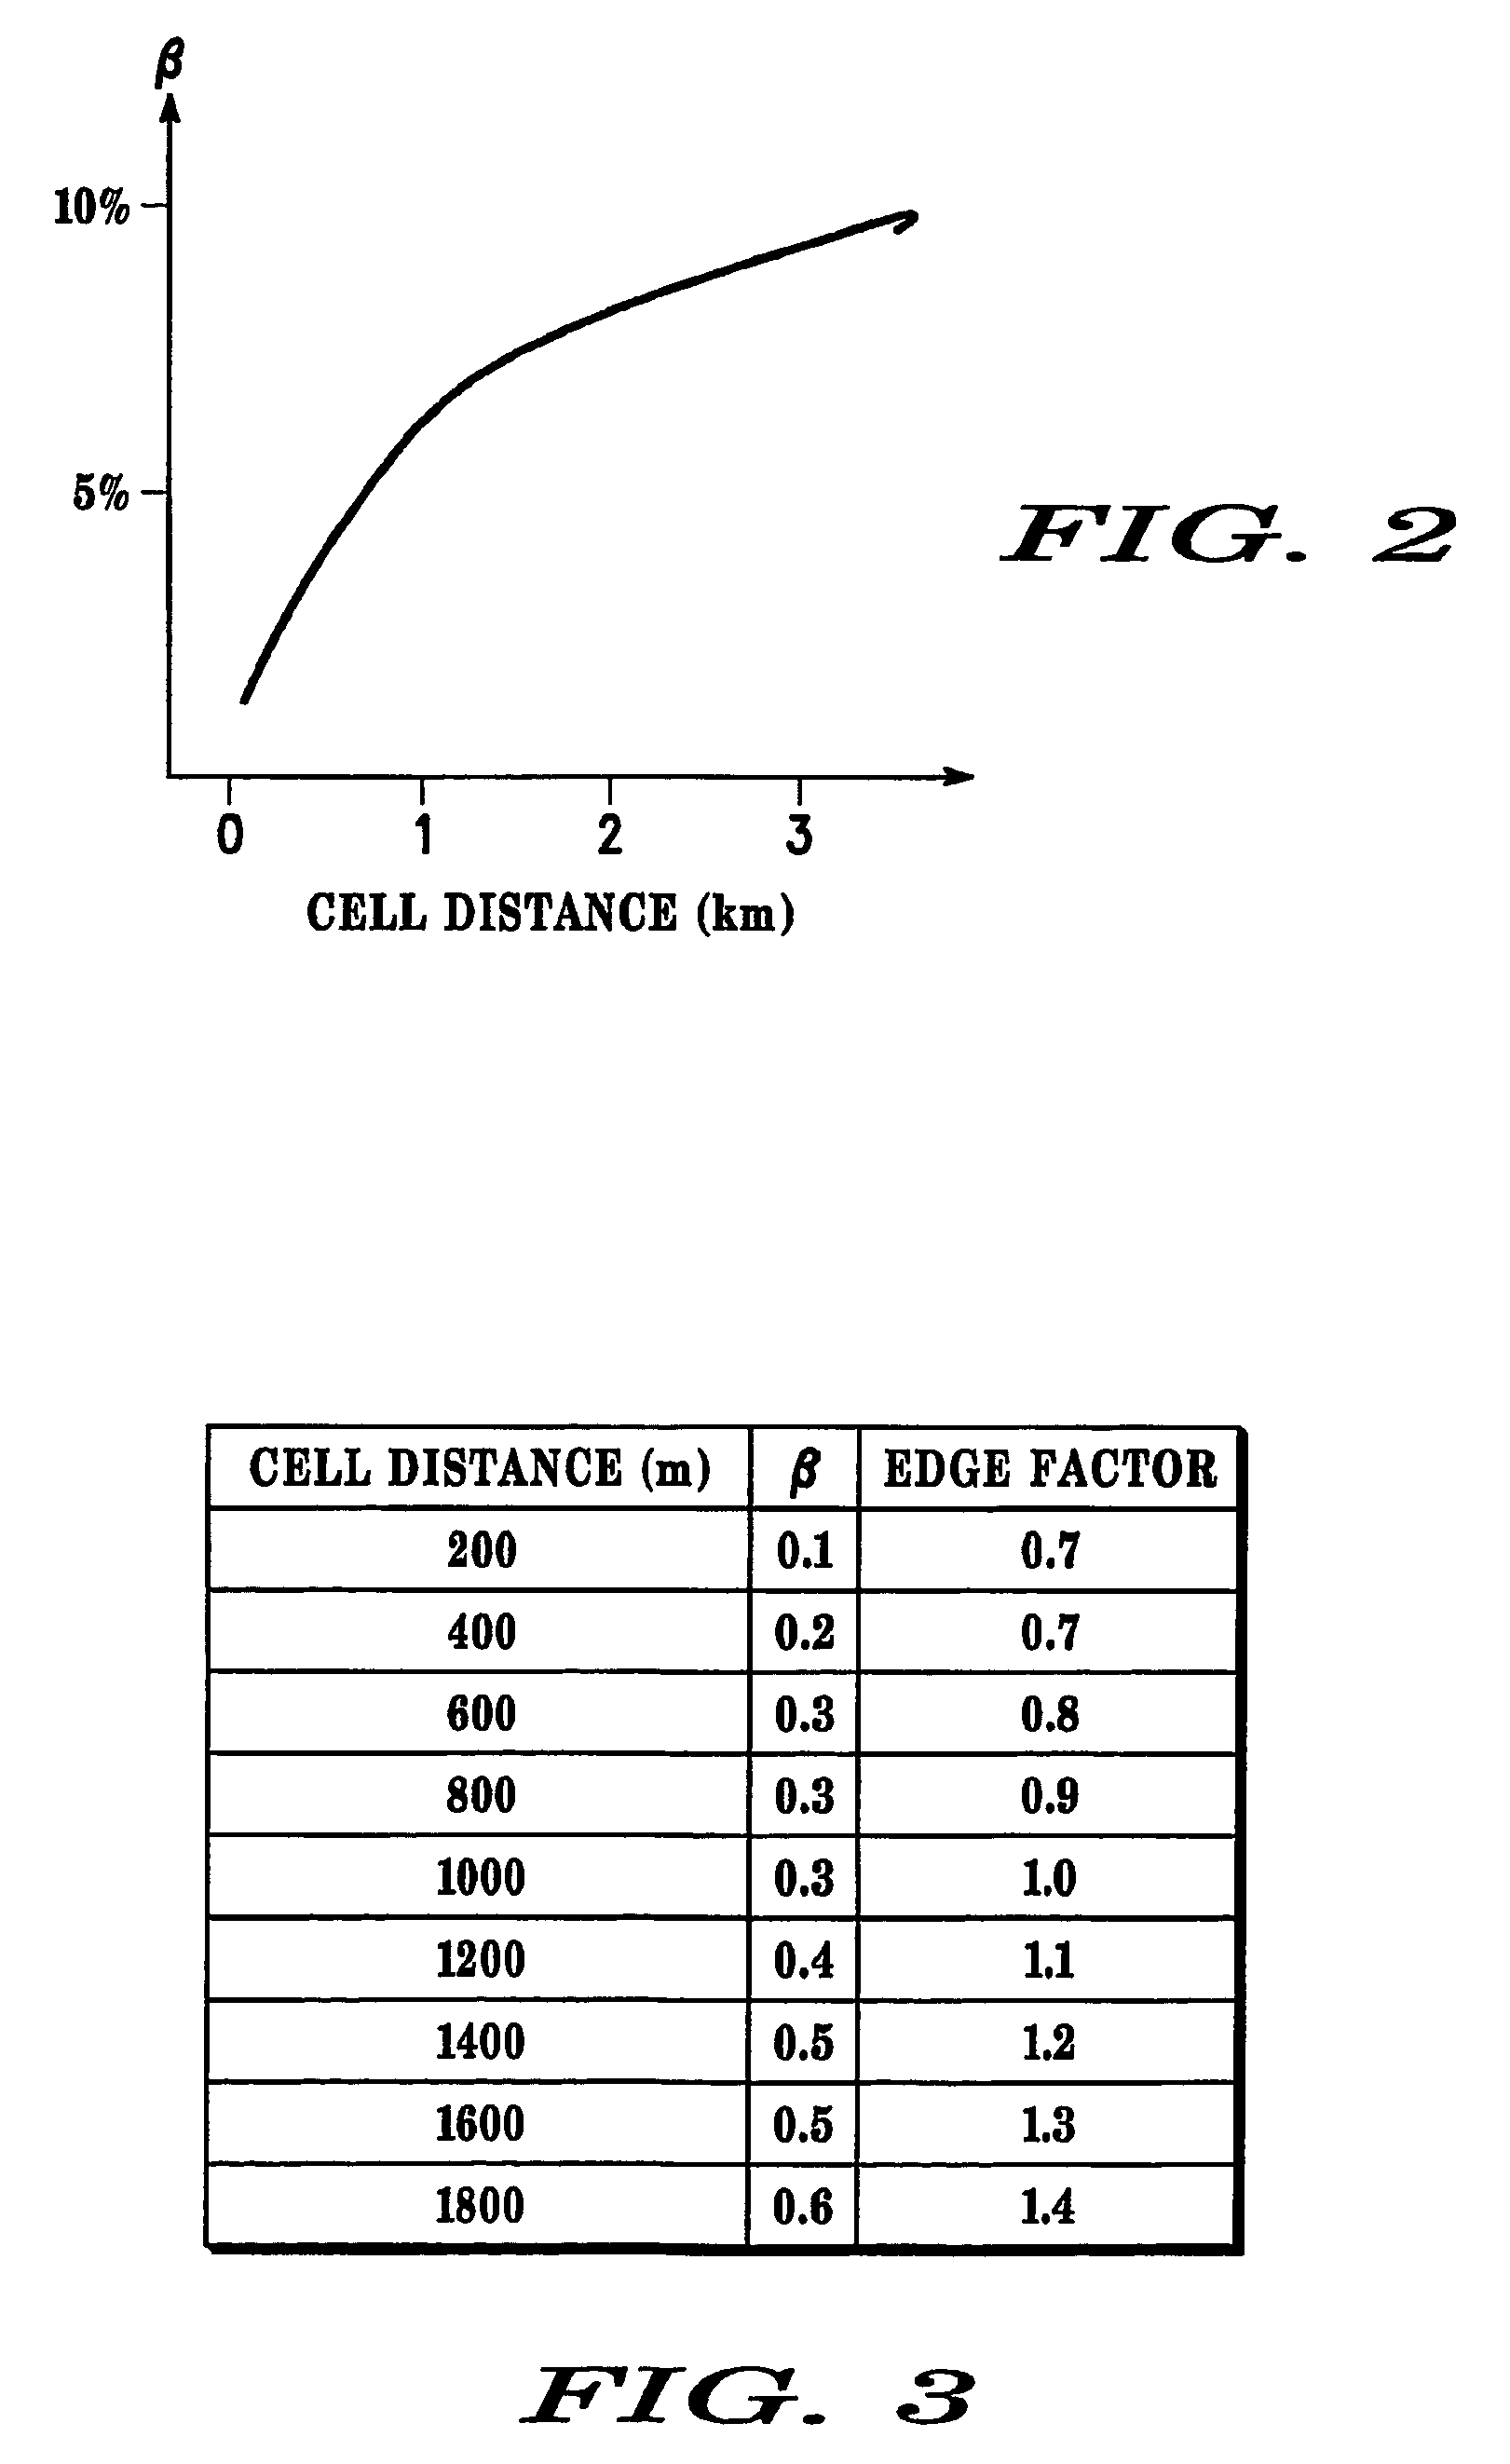 Apparatus and method of radio access management for a radio communication system